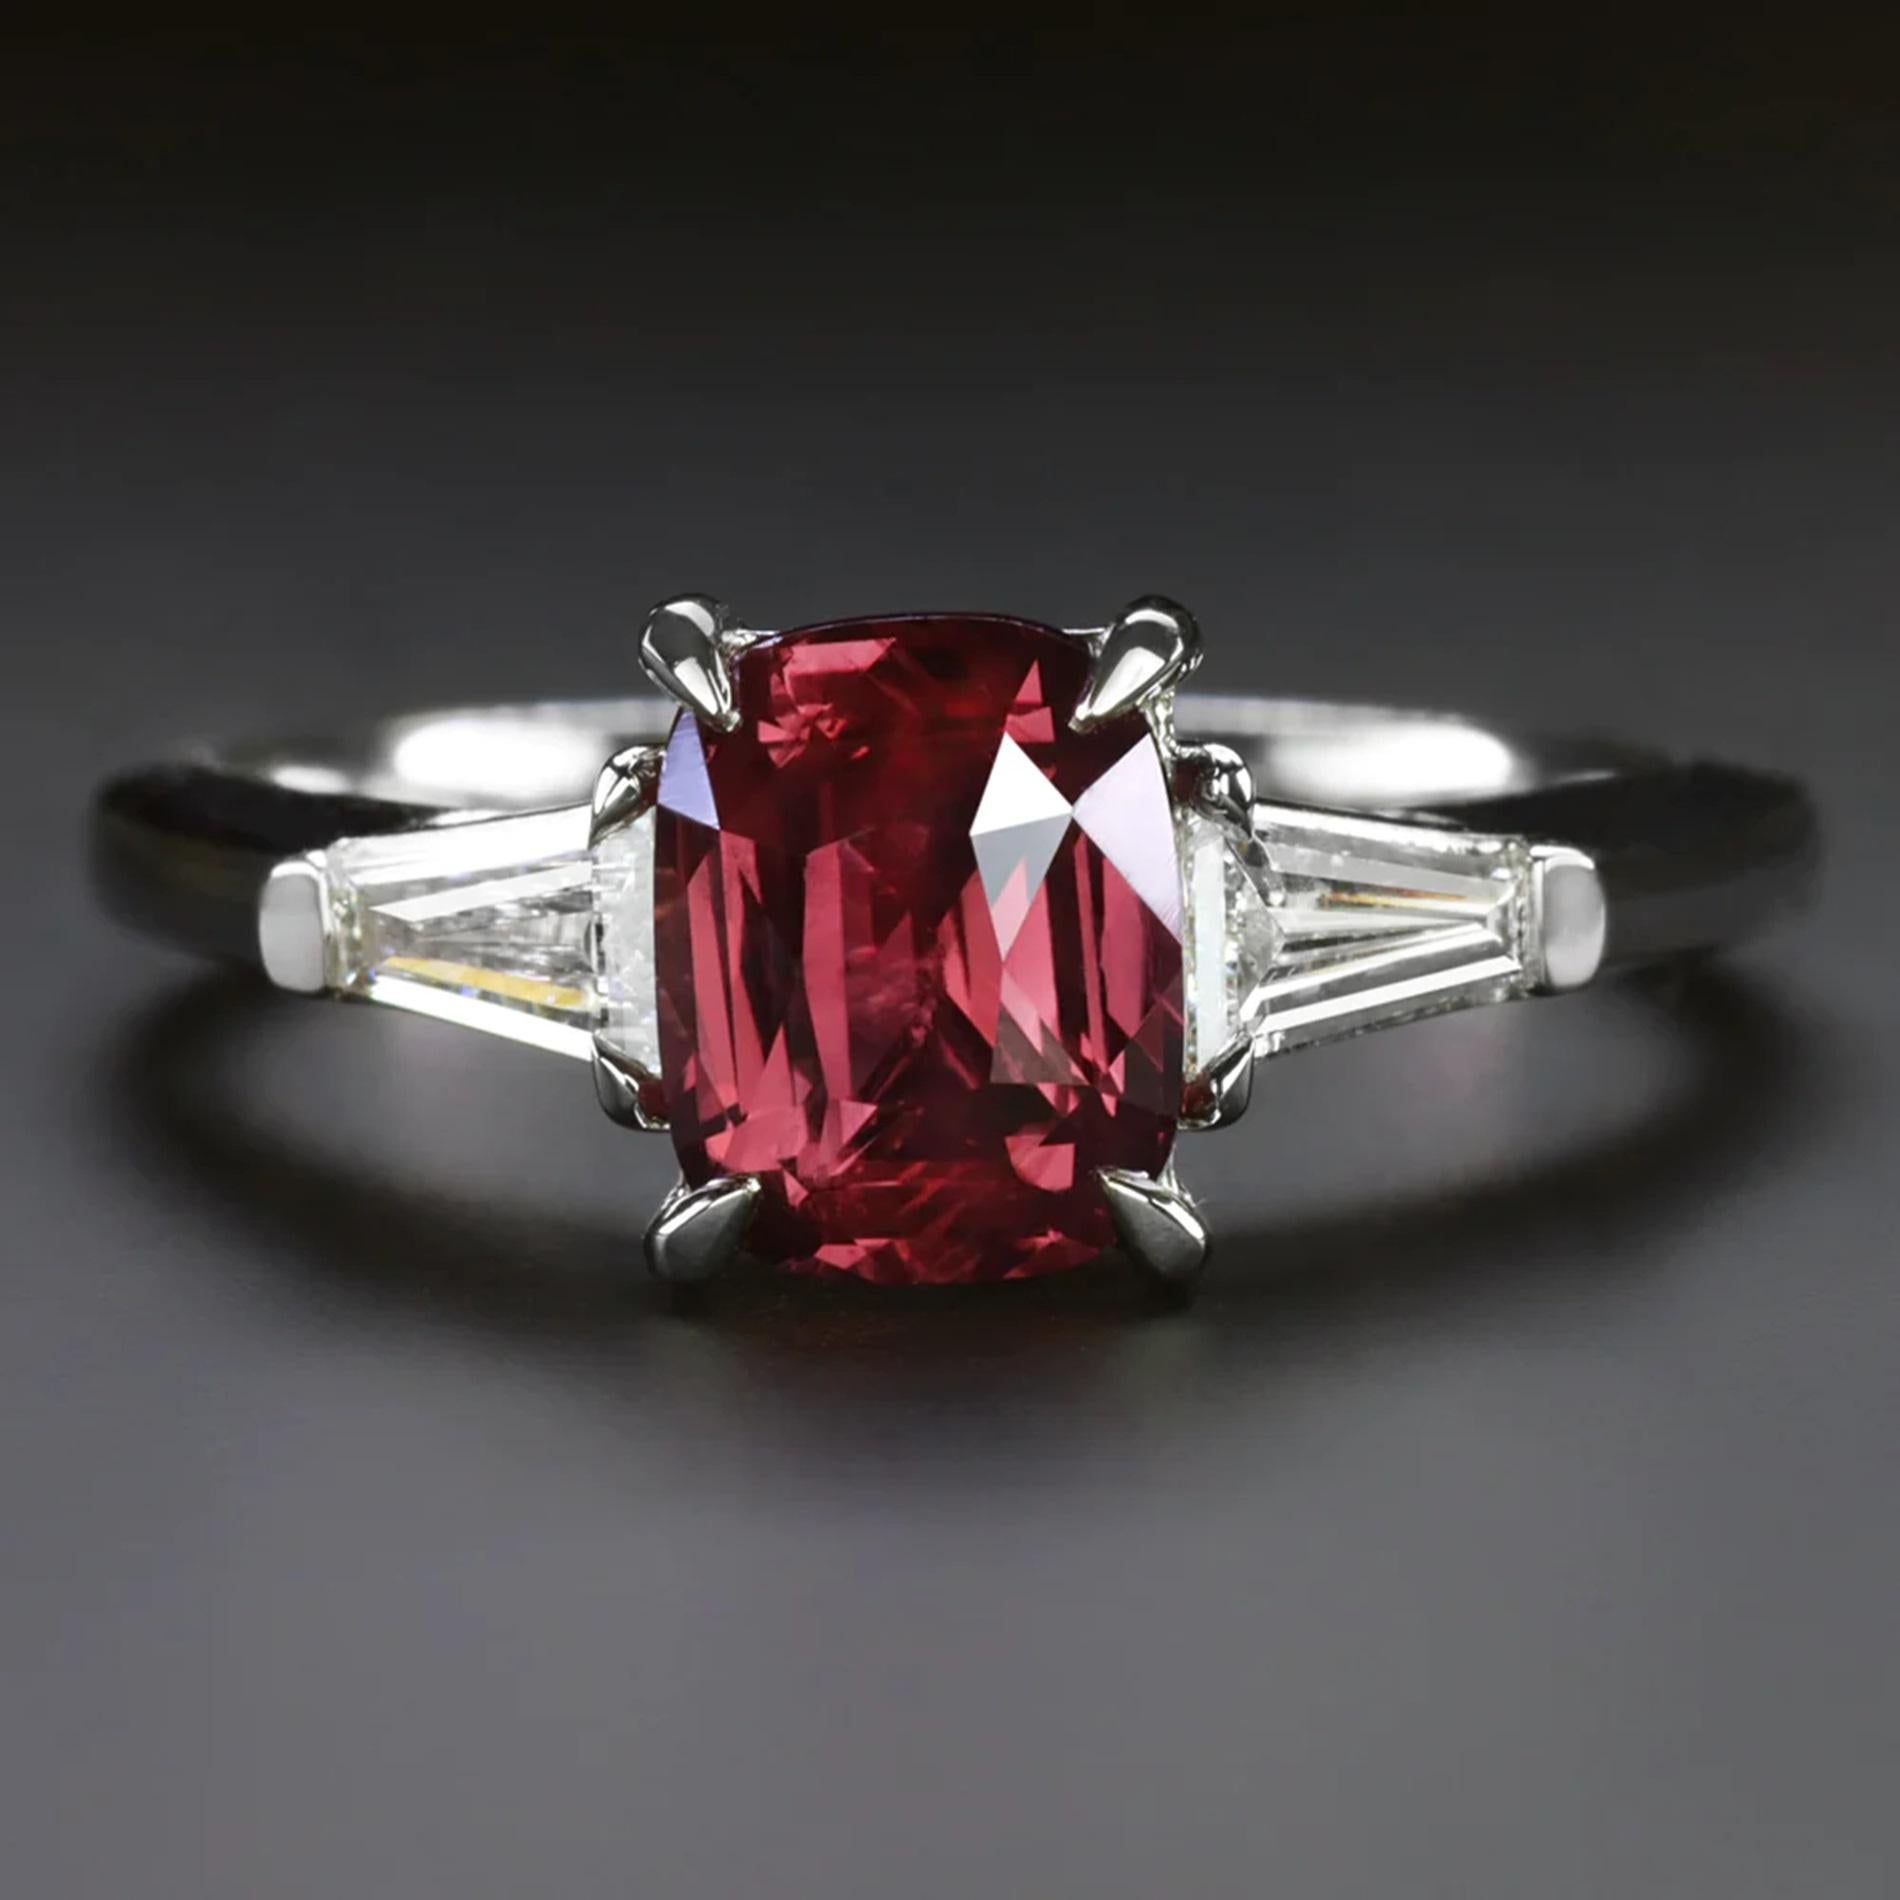 This ruby and diamond ring features a rich red ruby flanked by a pair of baguette diamonds for a sleek and sophisticated finish.

Highlights:

- 1.77ct natural ruby center with GIA certification

- Very rich red color

- Ruby appears very clean with